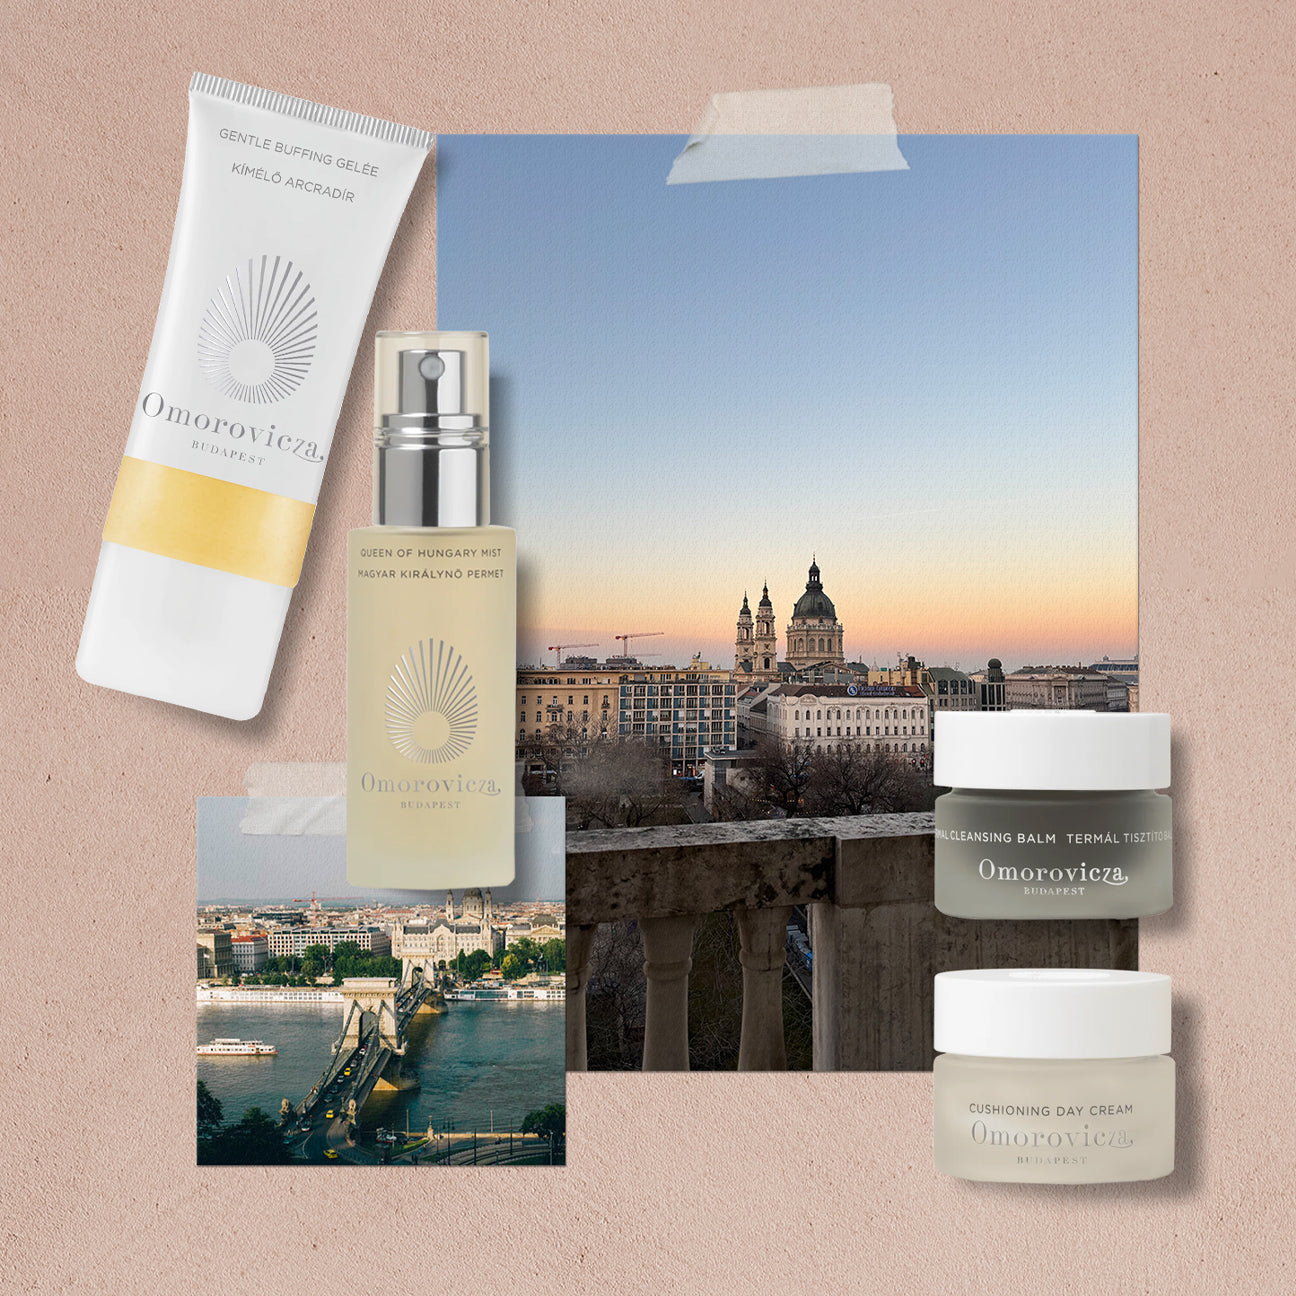 Travel Skincare Minis to Pack for Any Type of Destination